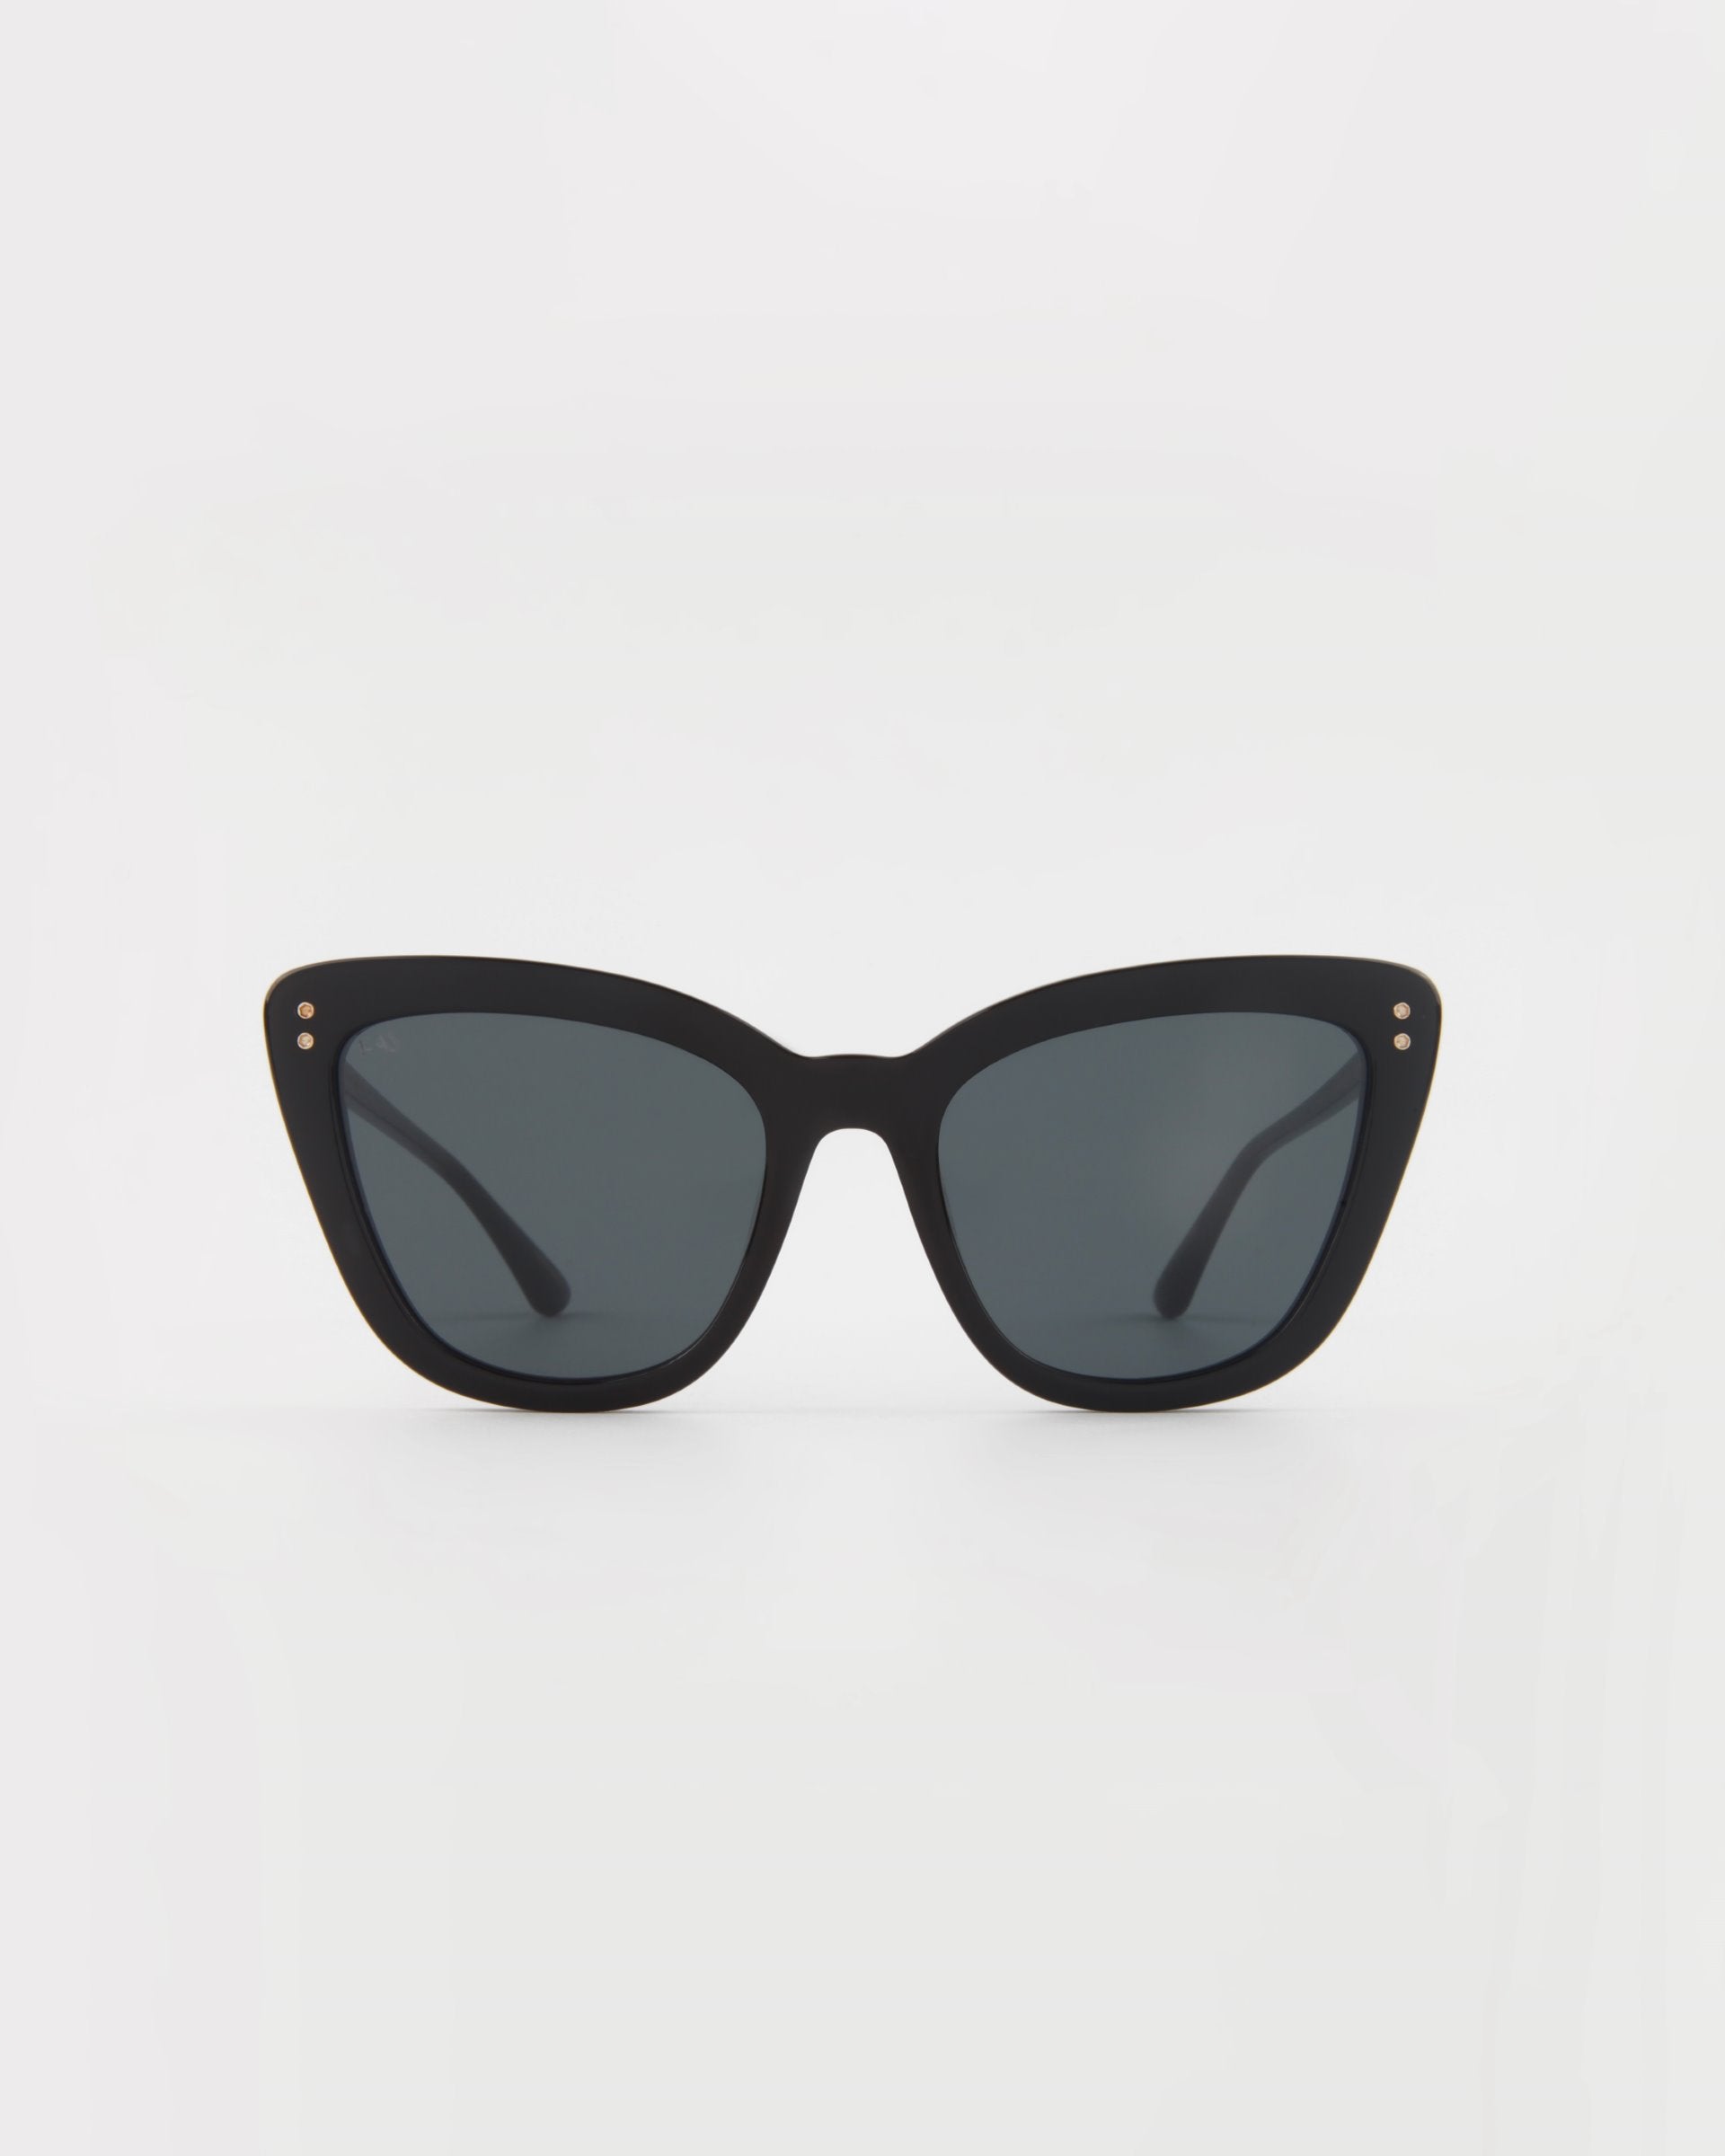 A pair of For Art's Sake® Ice Cream handmade acetate cat-eye sunglasses with dark tinted lenses is centered against a white background. The frame features small gold accents at the corners of the lenses, ensuring both style and UVA & UVB protection.